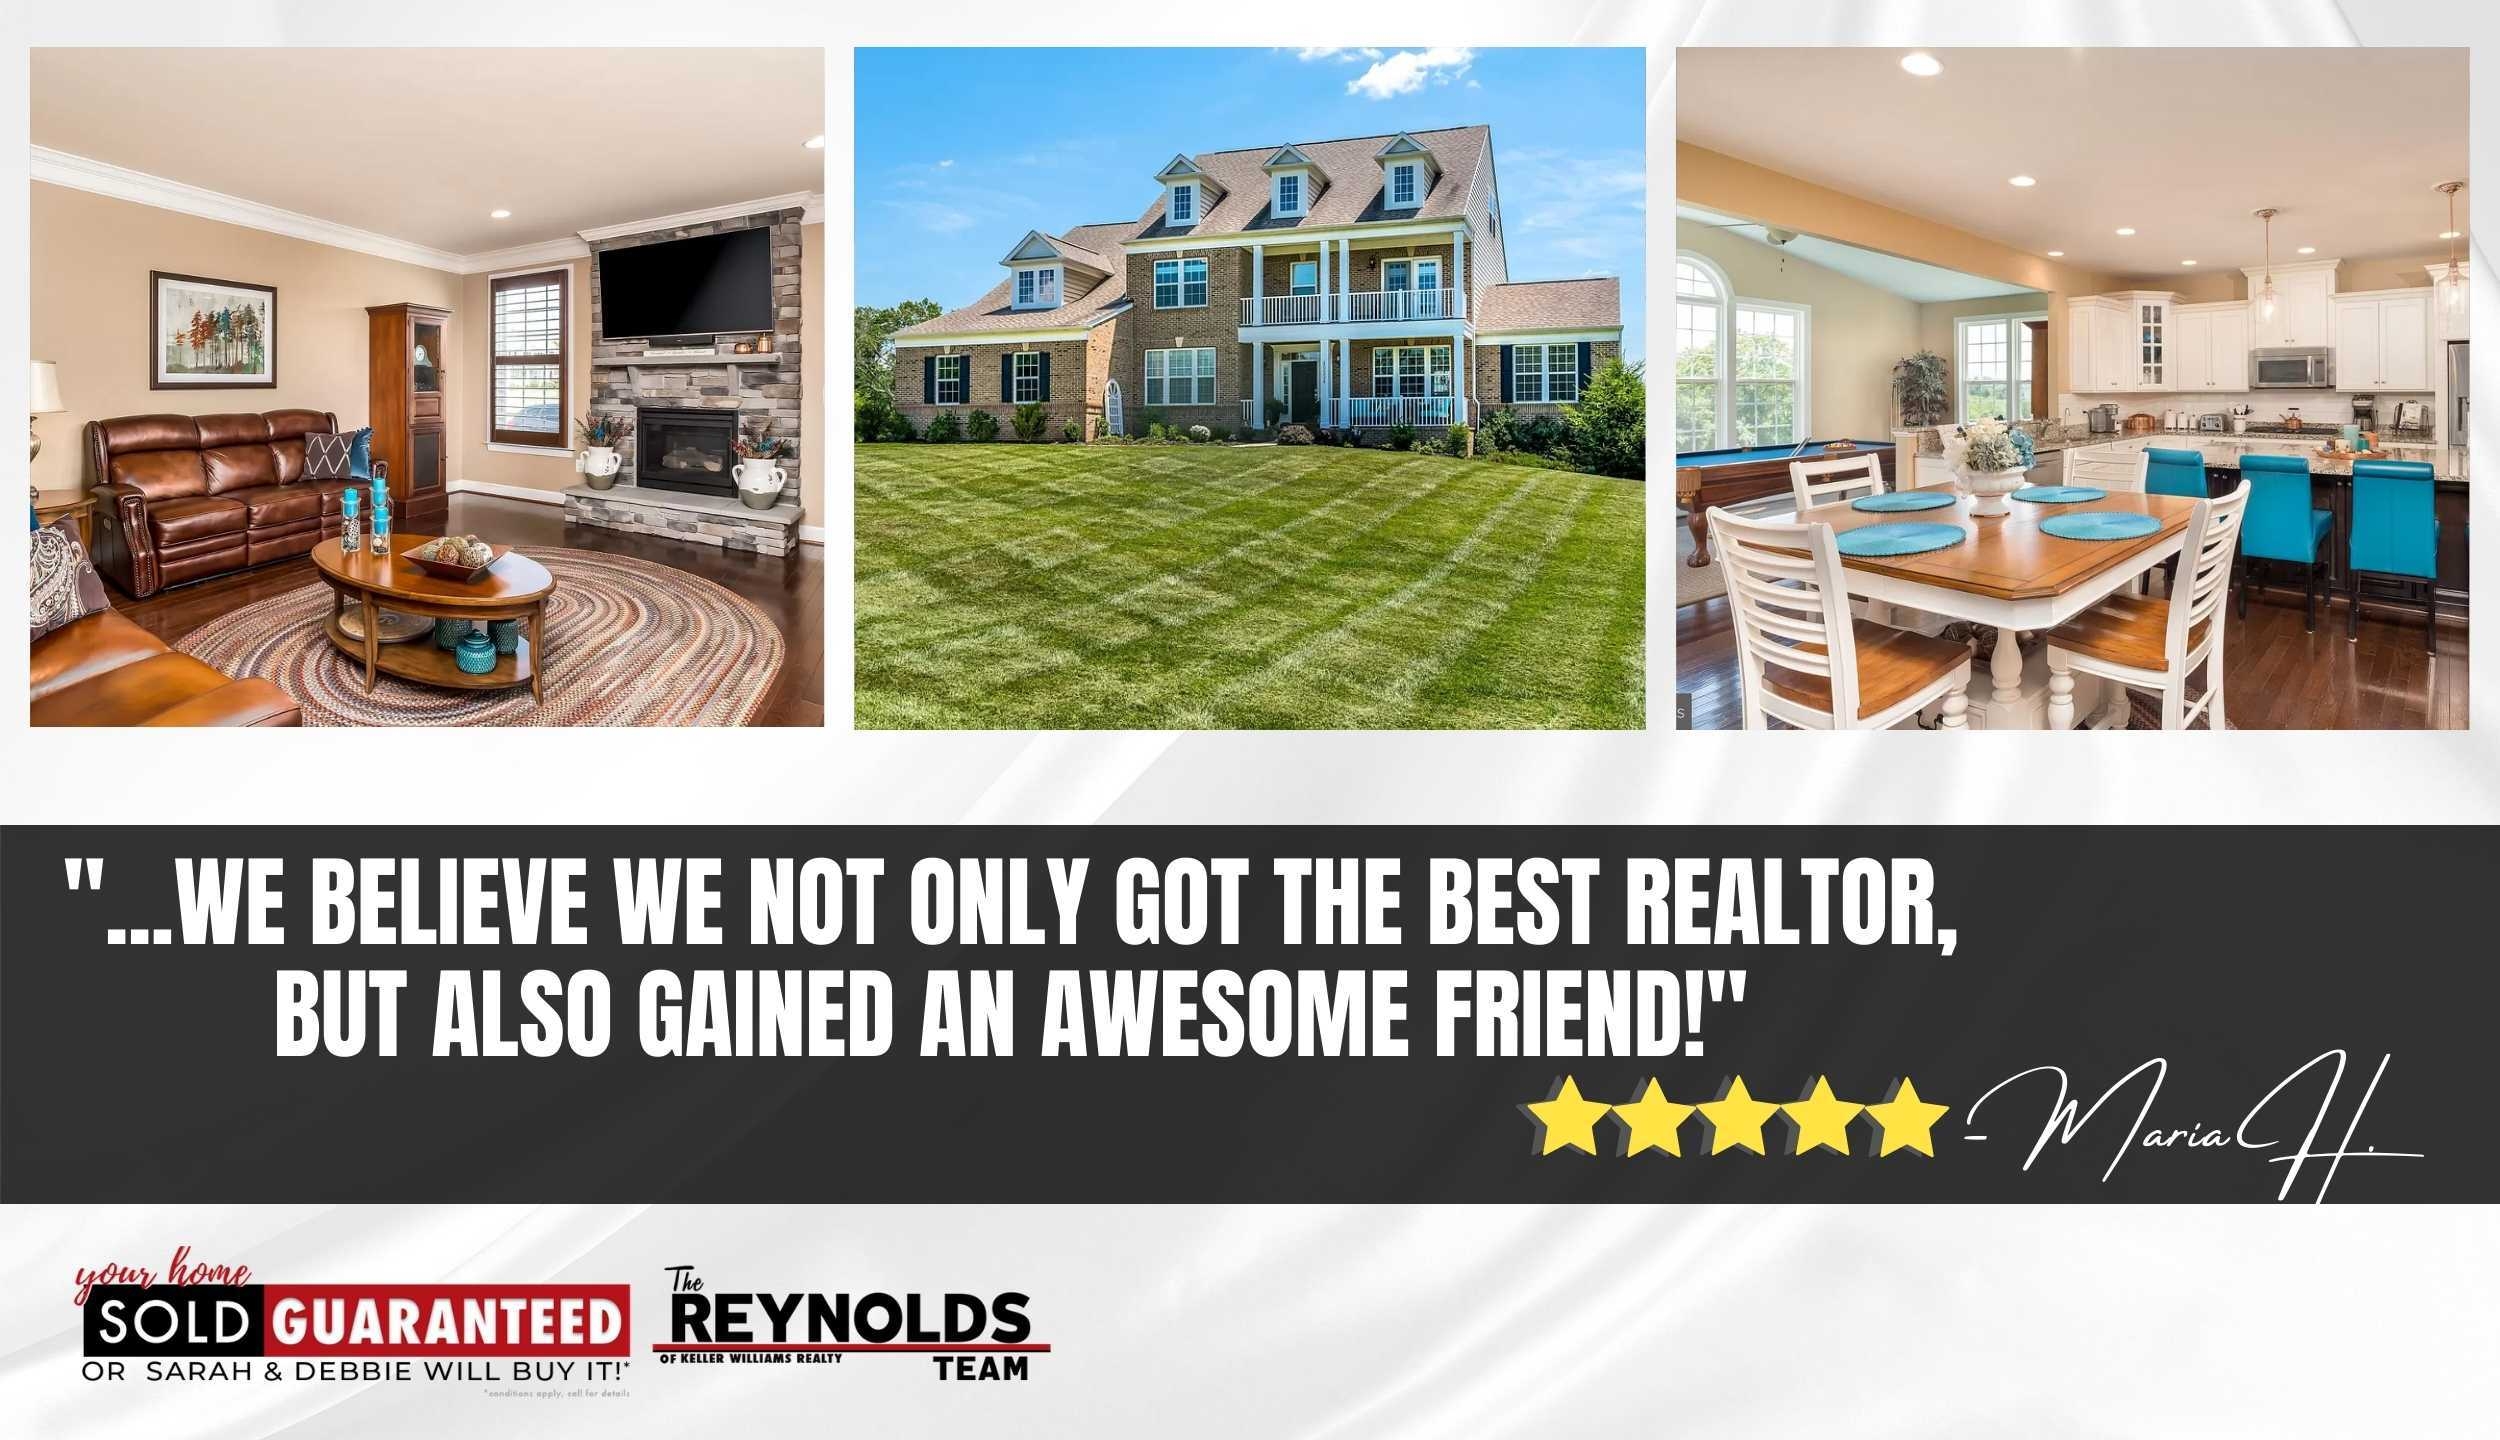 Leesburg, VA Family gives The Reynolds Team 5-Star Review with their dream home